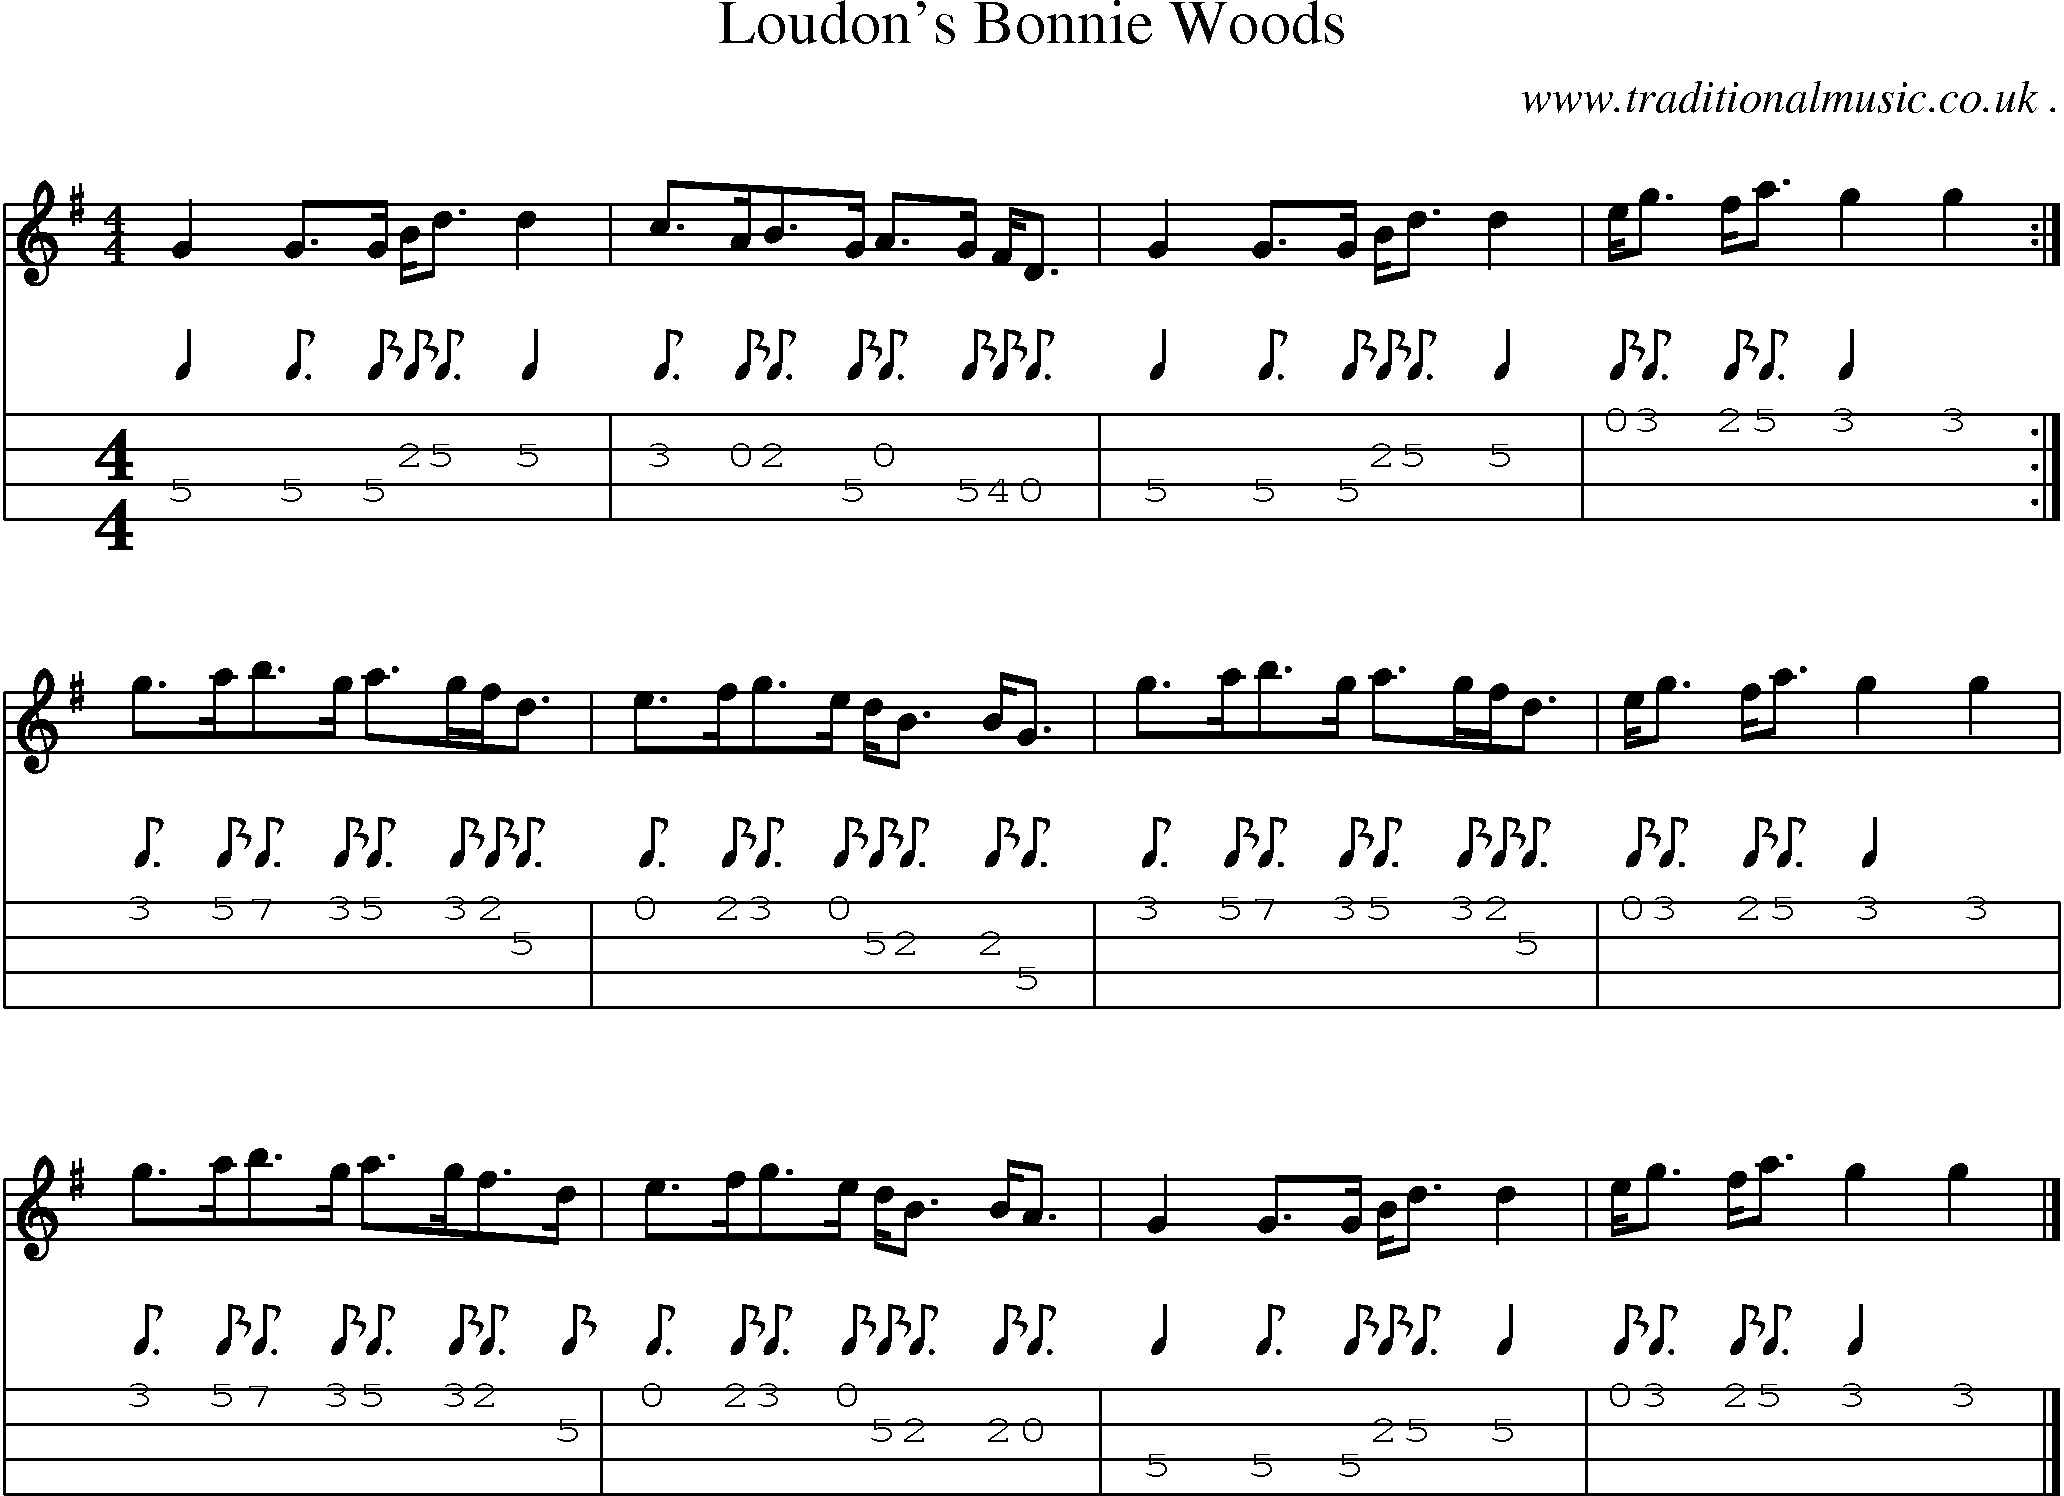 Sheet-music  score, Chords and Mandolin Tabs for Loudons Bonnie Woods